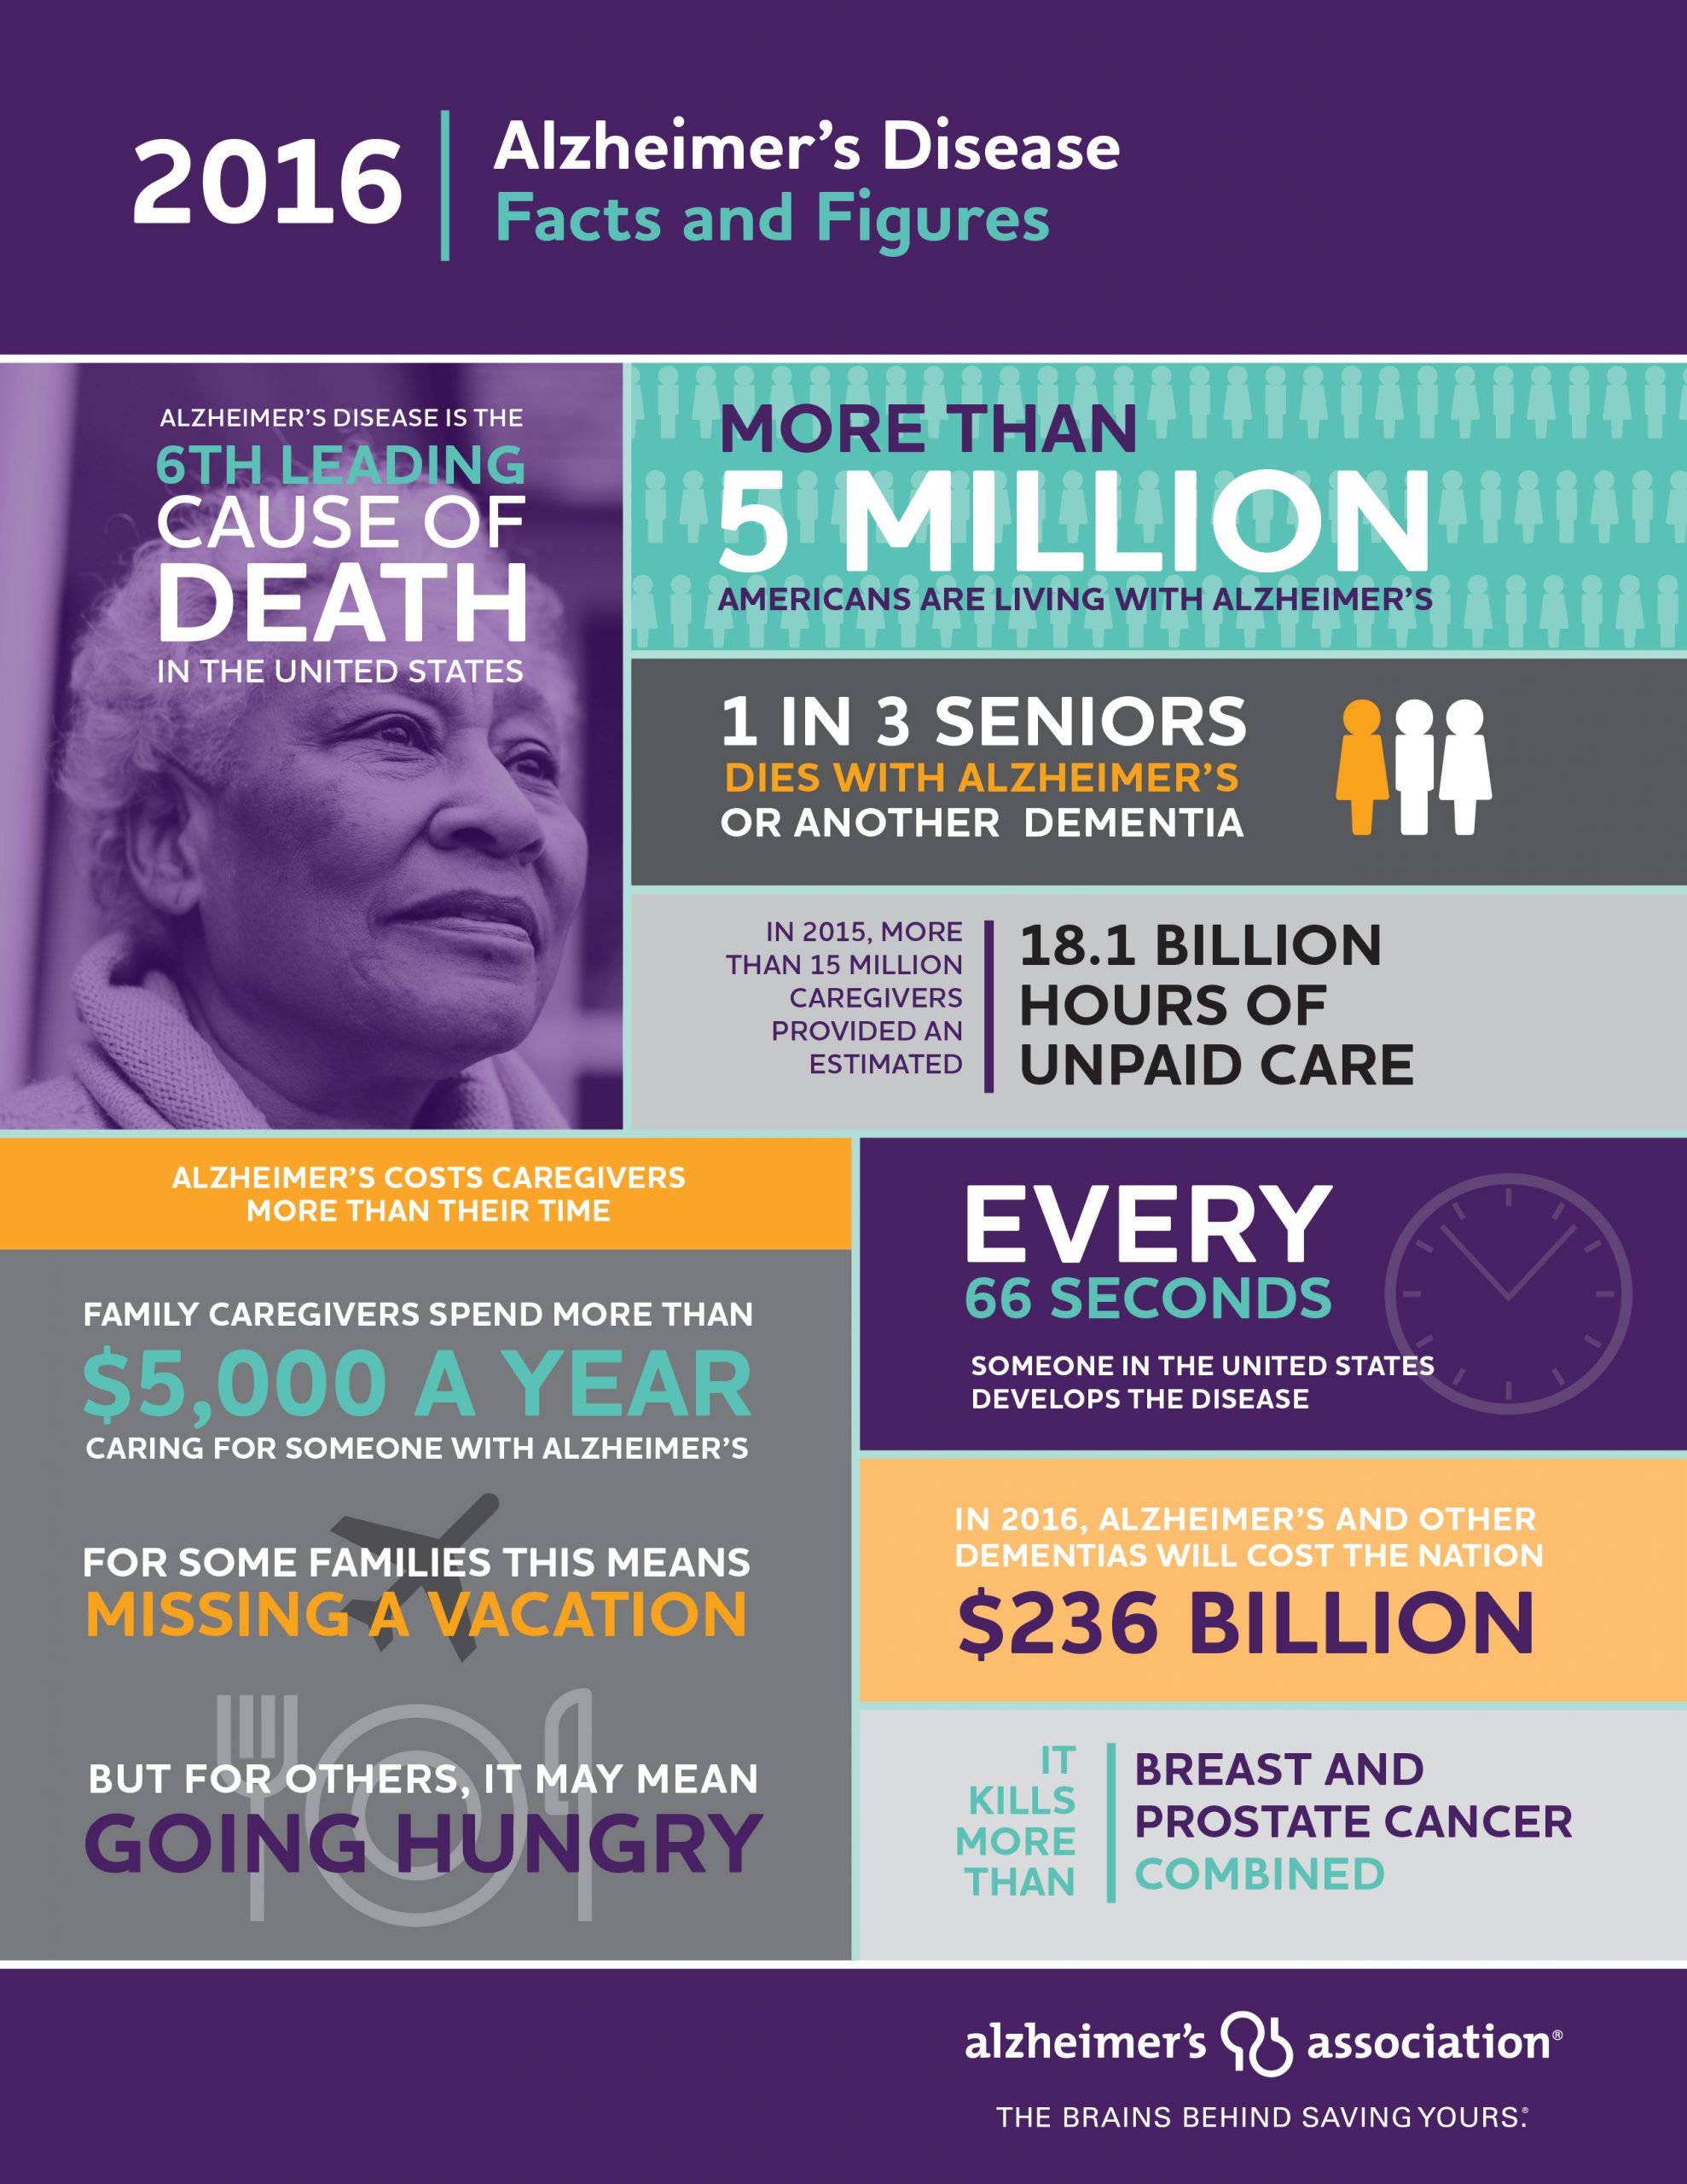 Alzheimers Association releases 2016 Alzheimers Disease Facts and ...